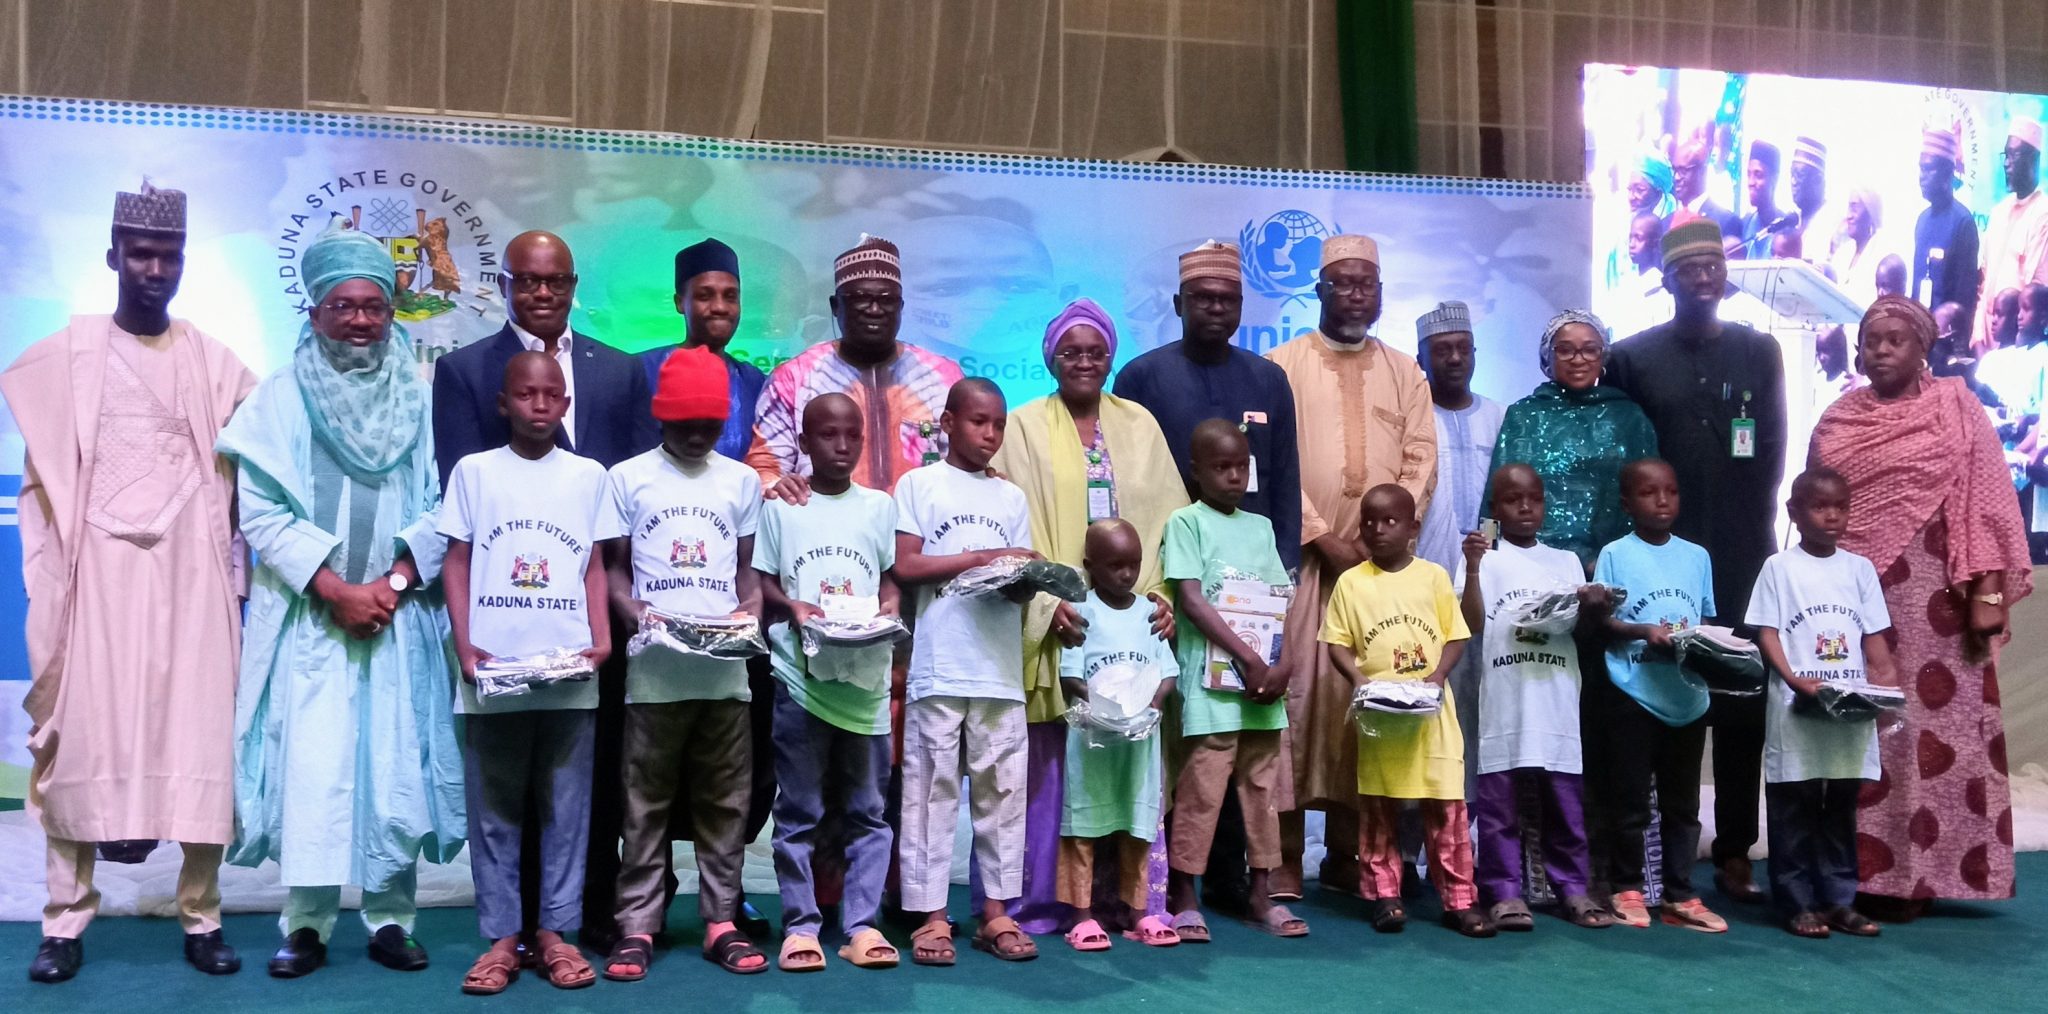 UNICEF to provide quality child protection services for vulnerable children in Kaduna